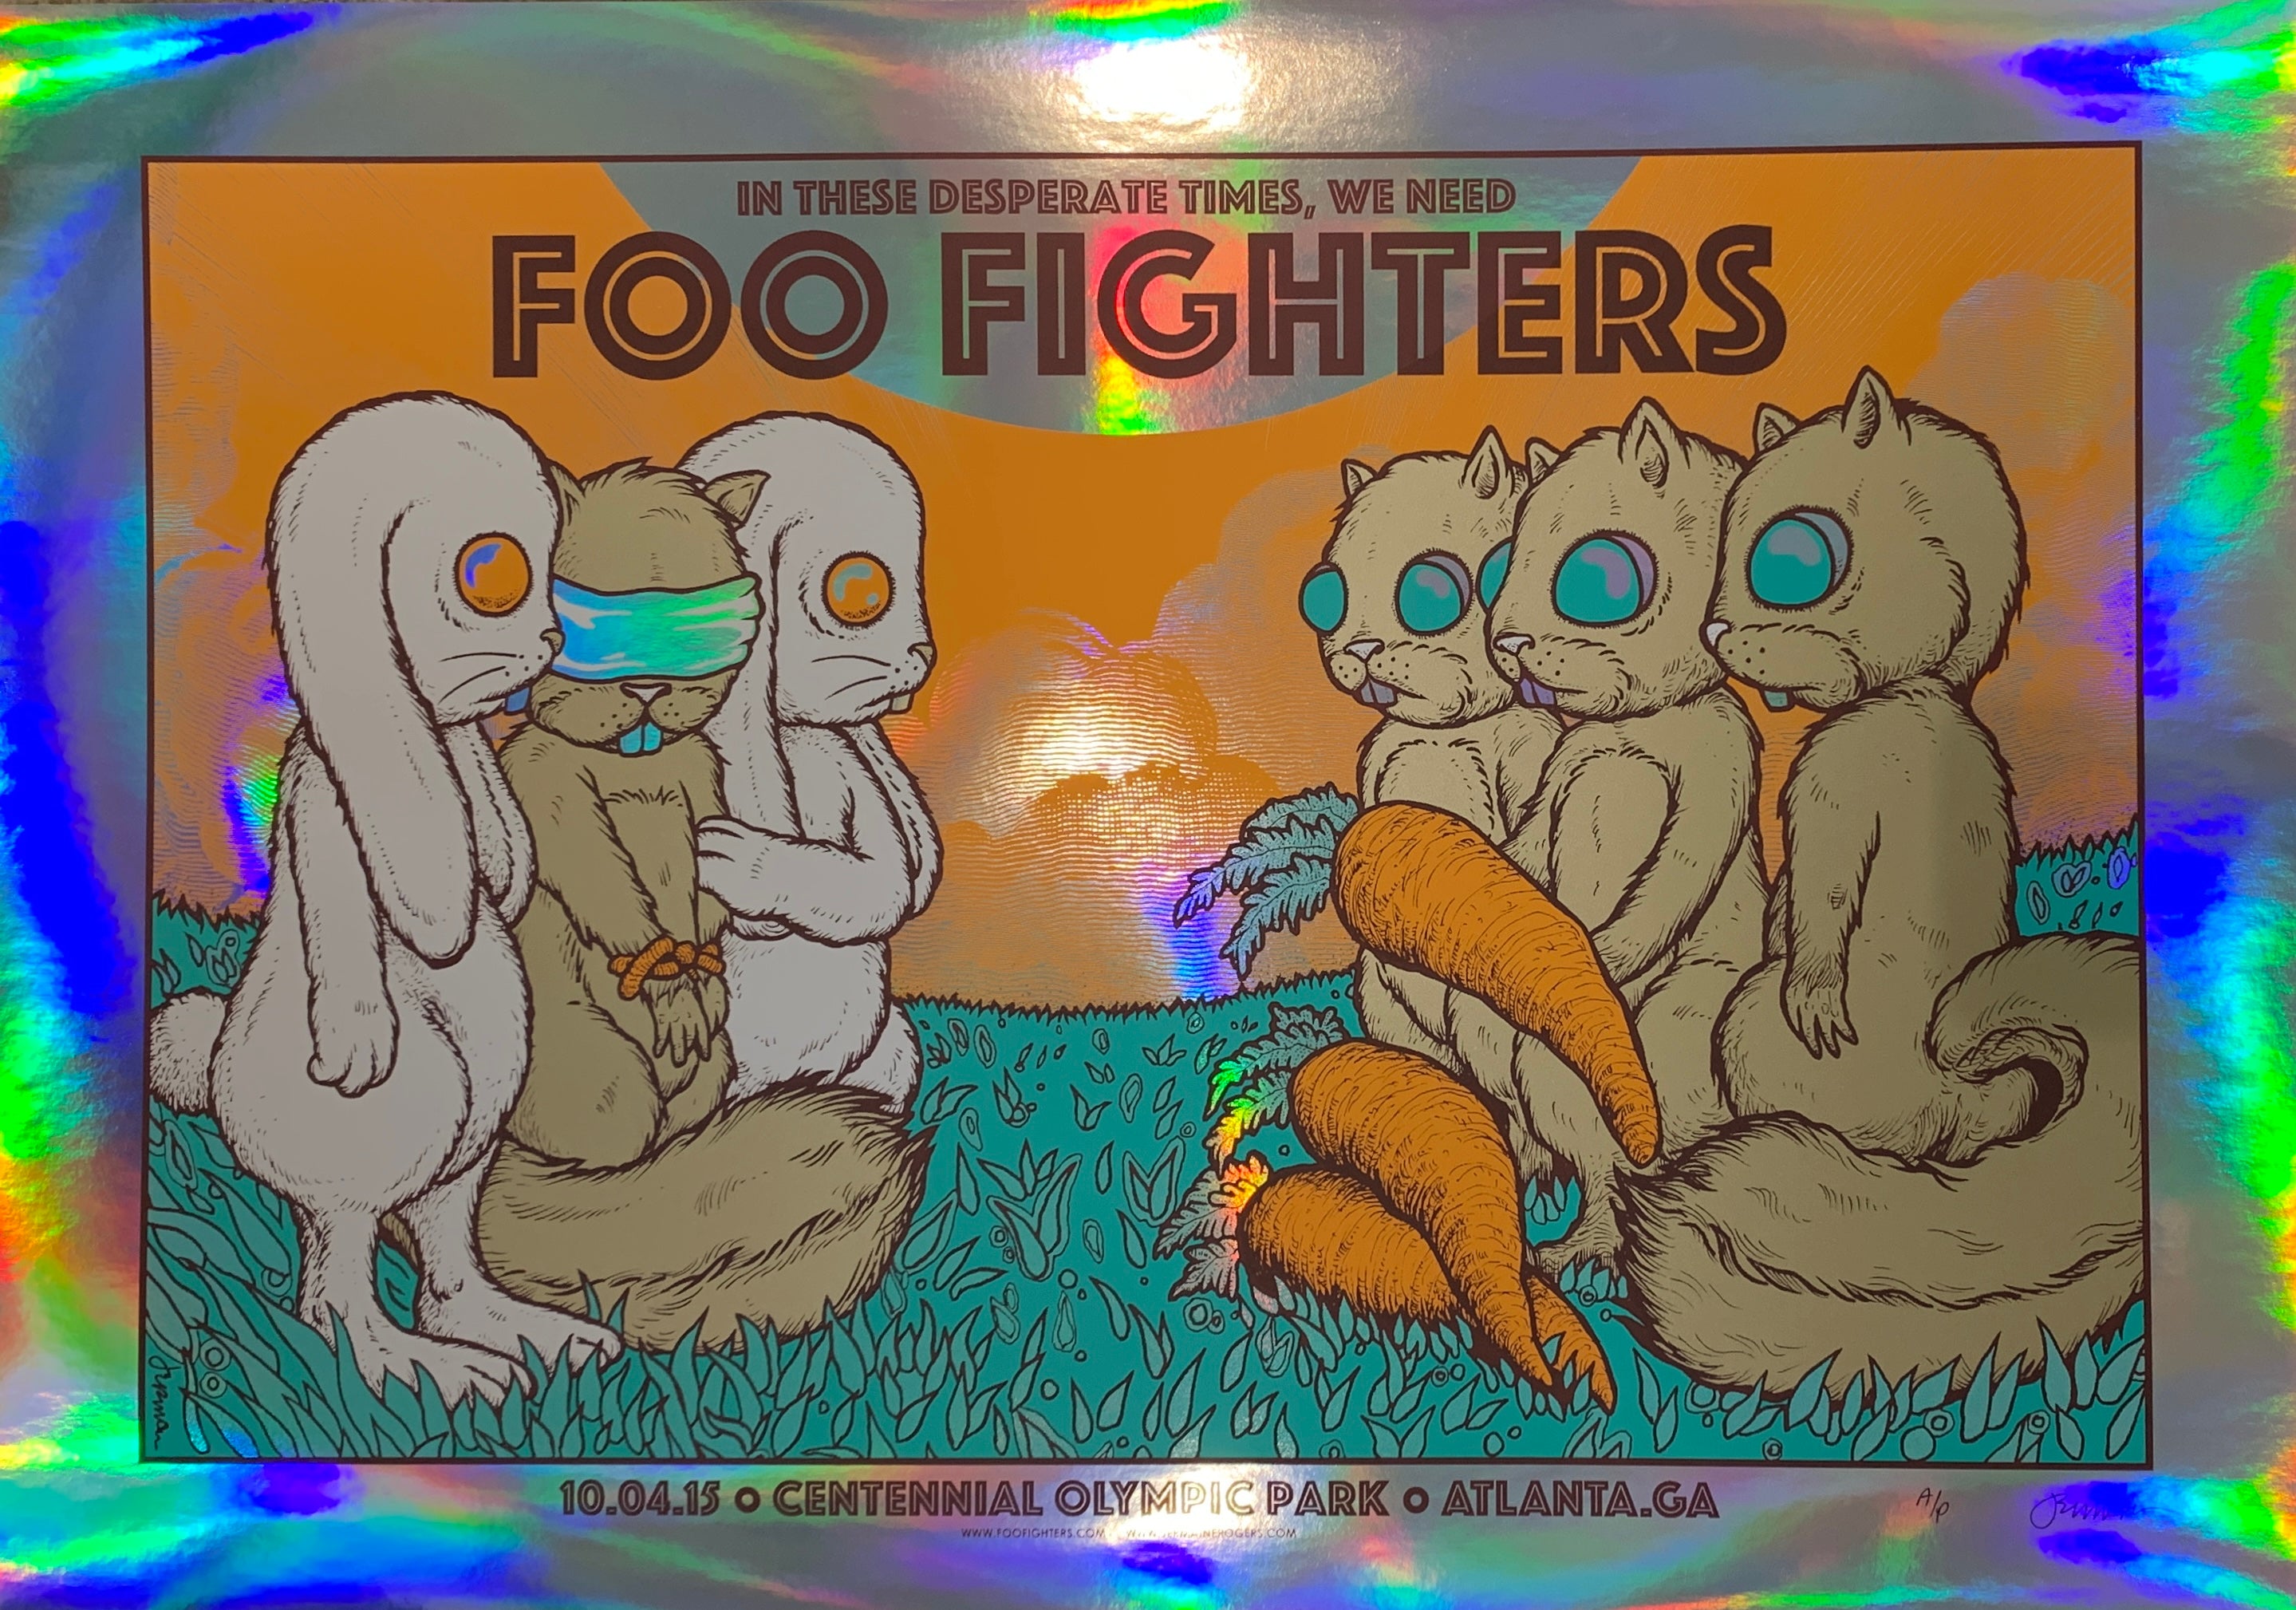 Foo Fighters - ATL 2015 A/P - Foil (The Exchange)